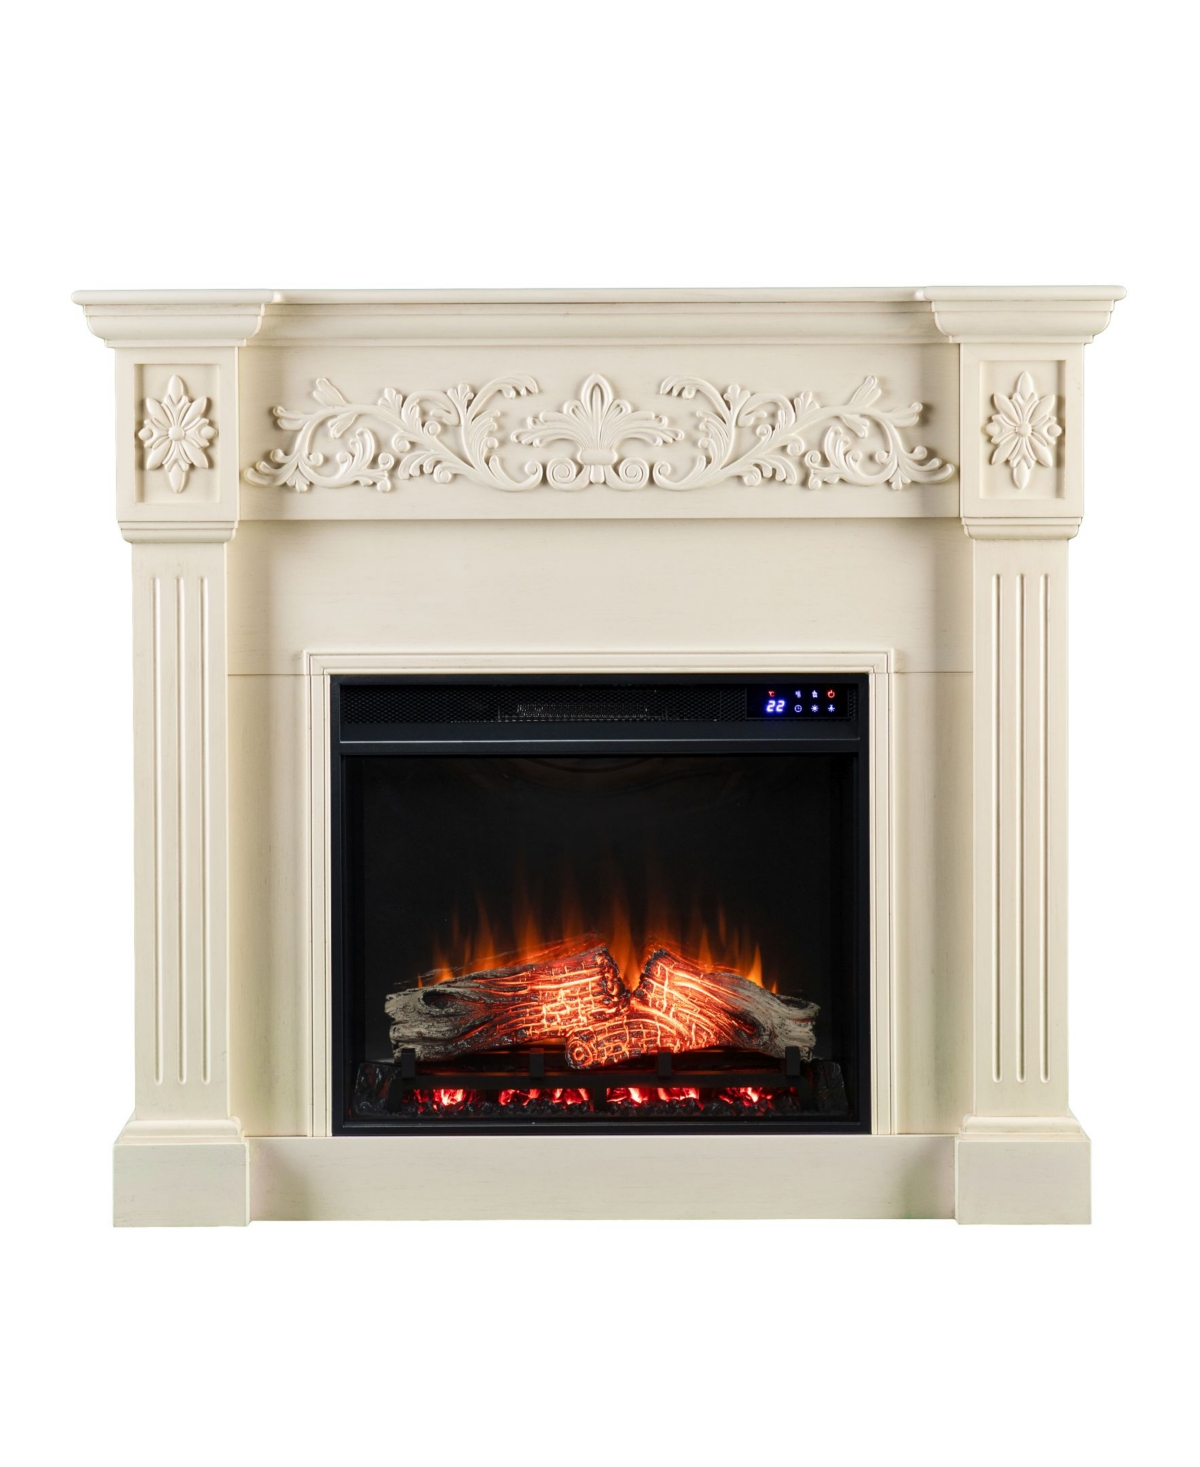 Southern Enterprises Cilt Carved Electric Fireplace In Creamy Brushed Ivory Finish